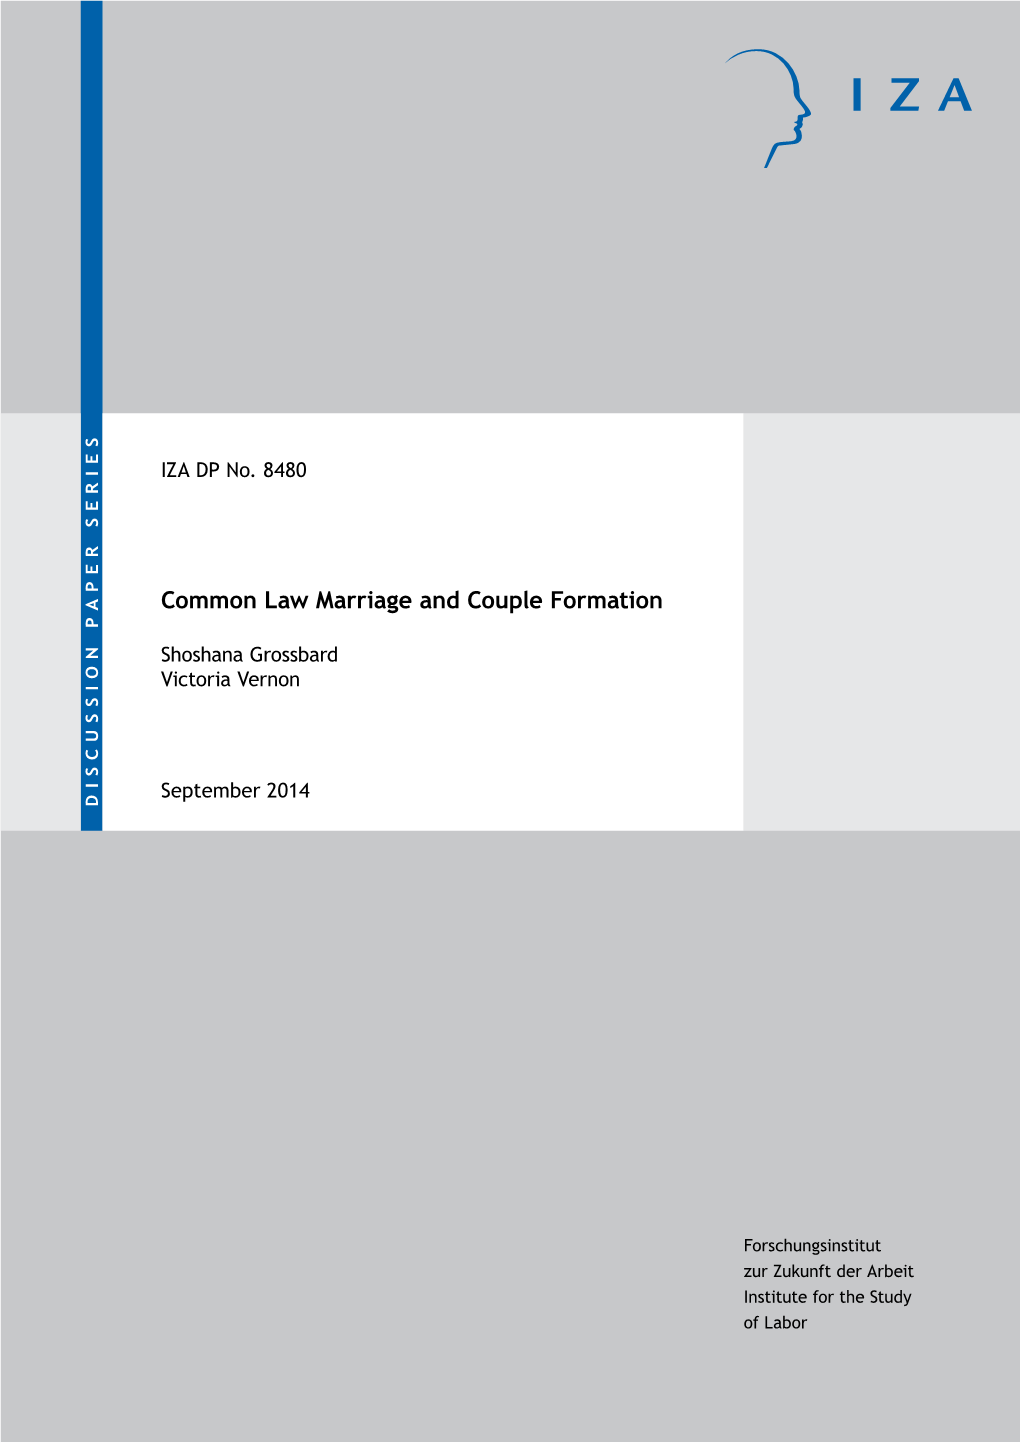 Common Law Marriage and Couple Formation